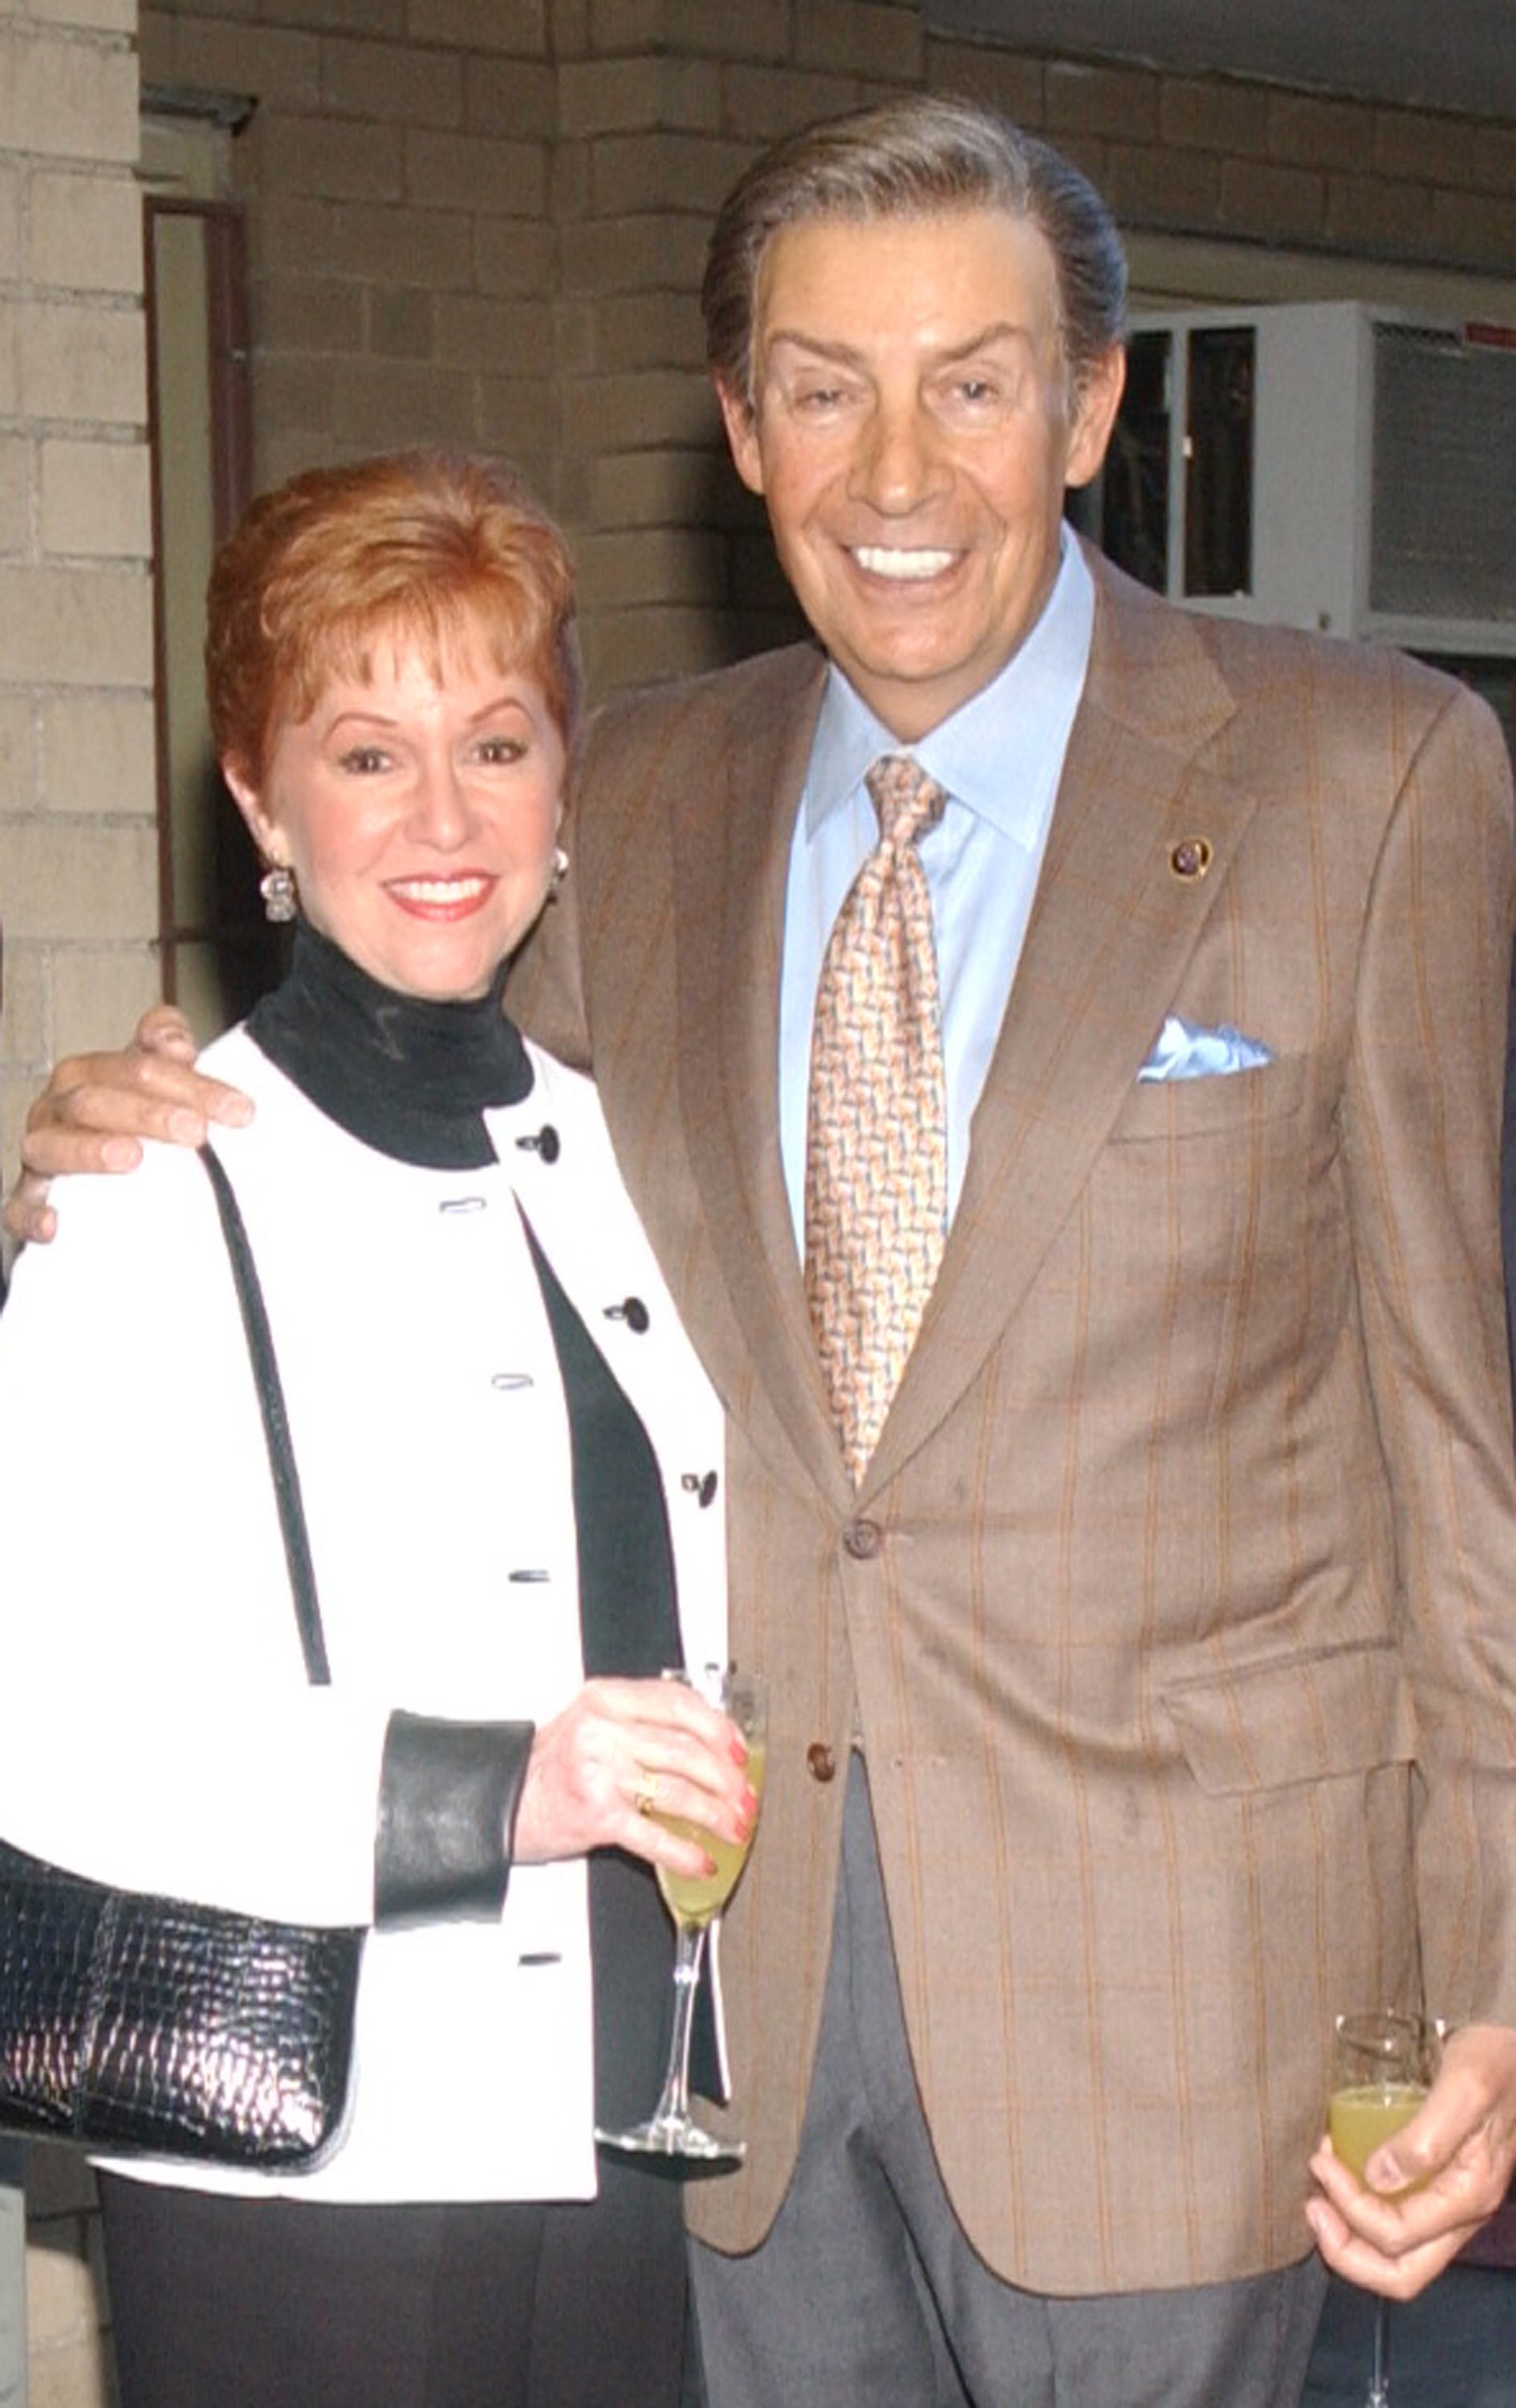 Elaine Cancilla and Jerry Orbach during 1130 at New York City onOctober 3, 2004 | Source: Getty Images